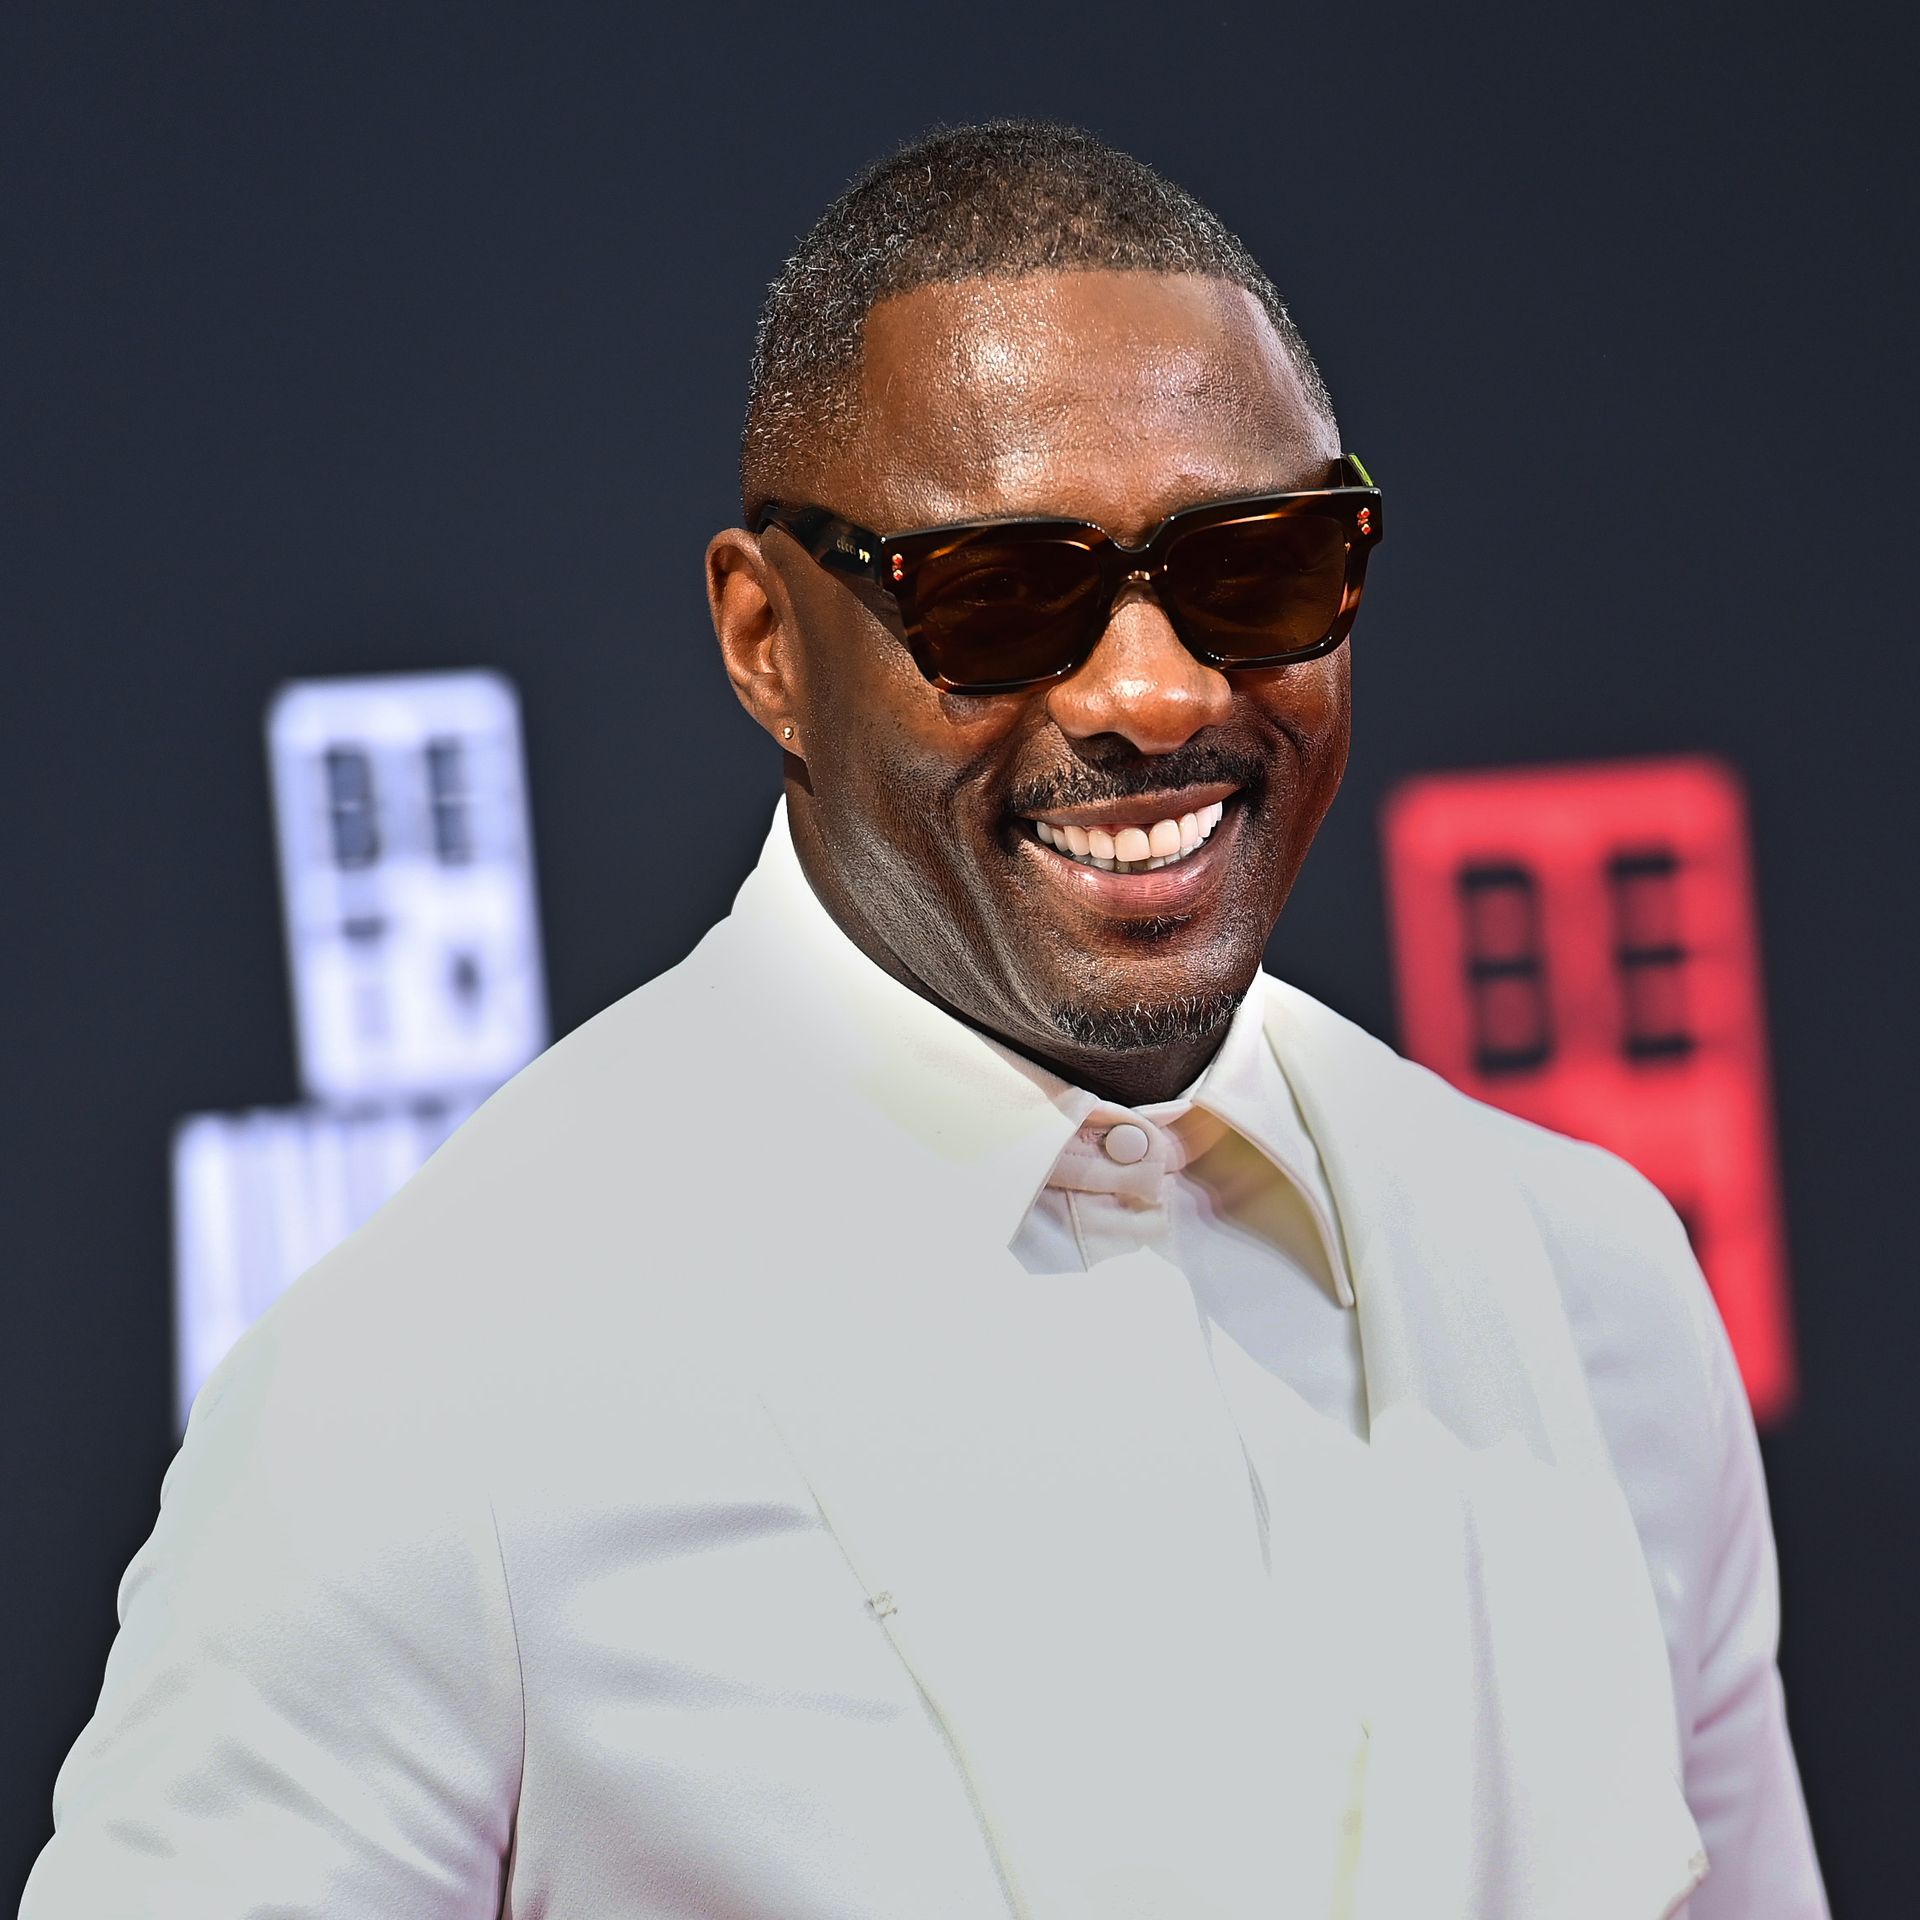 Idris Elba. Photo: Paras Griffin/Getty Images for BET